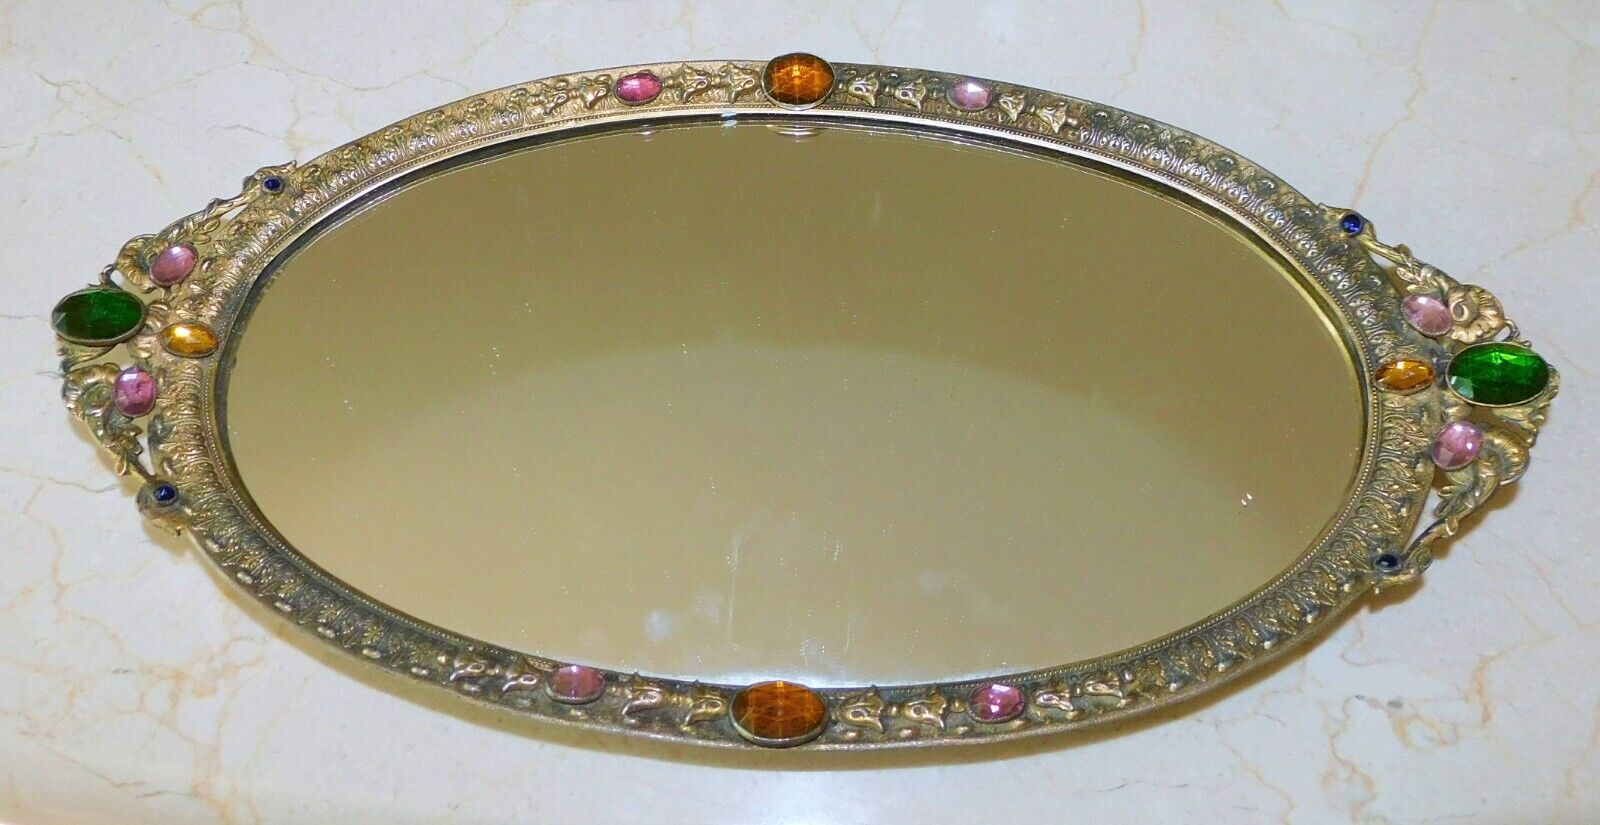 ANTIQUE VINTAGE JEWELED OVAL MIRROR FOOTED DRESSER TRAY